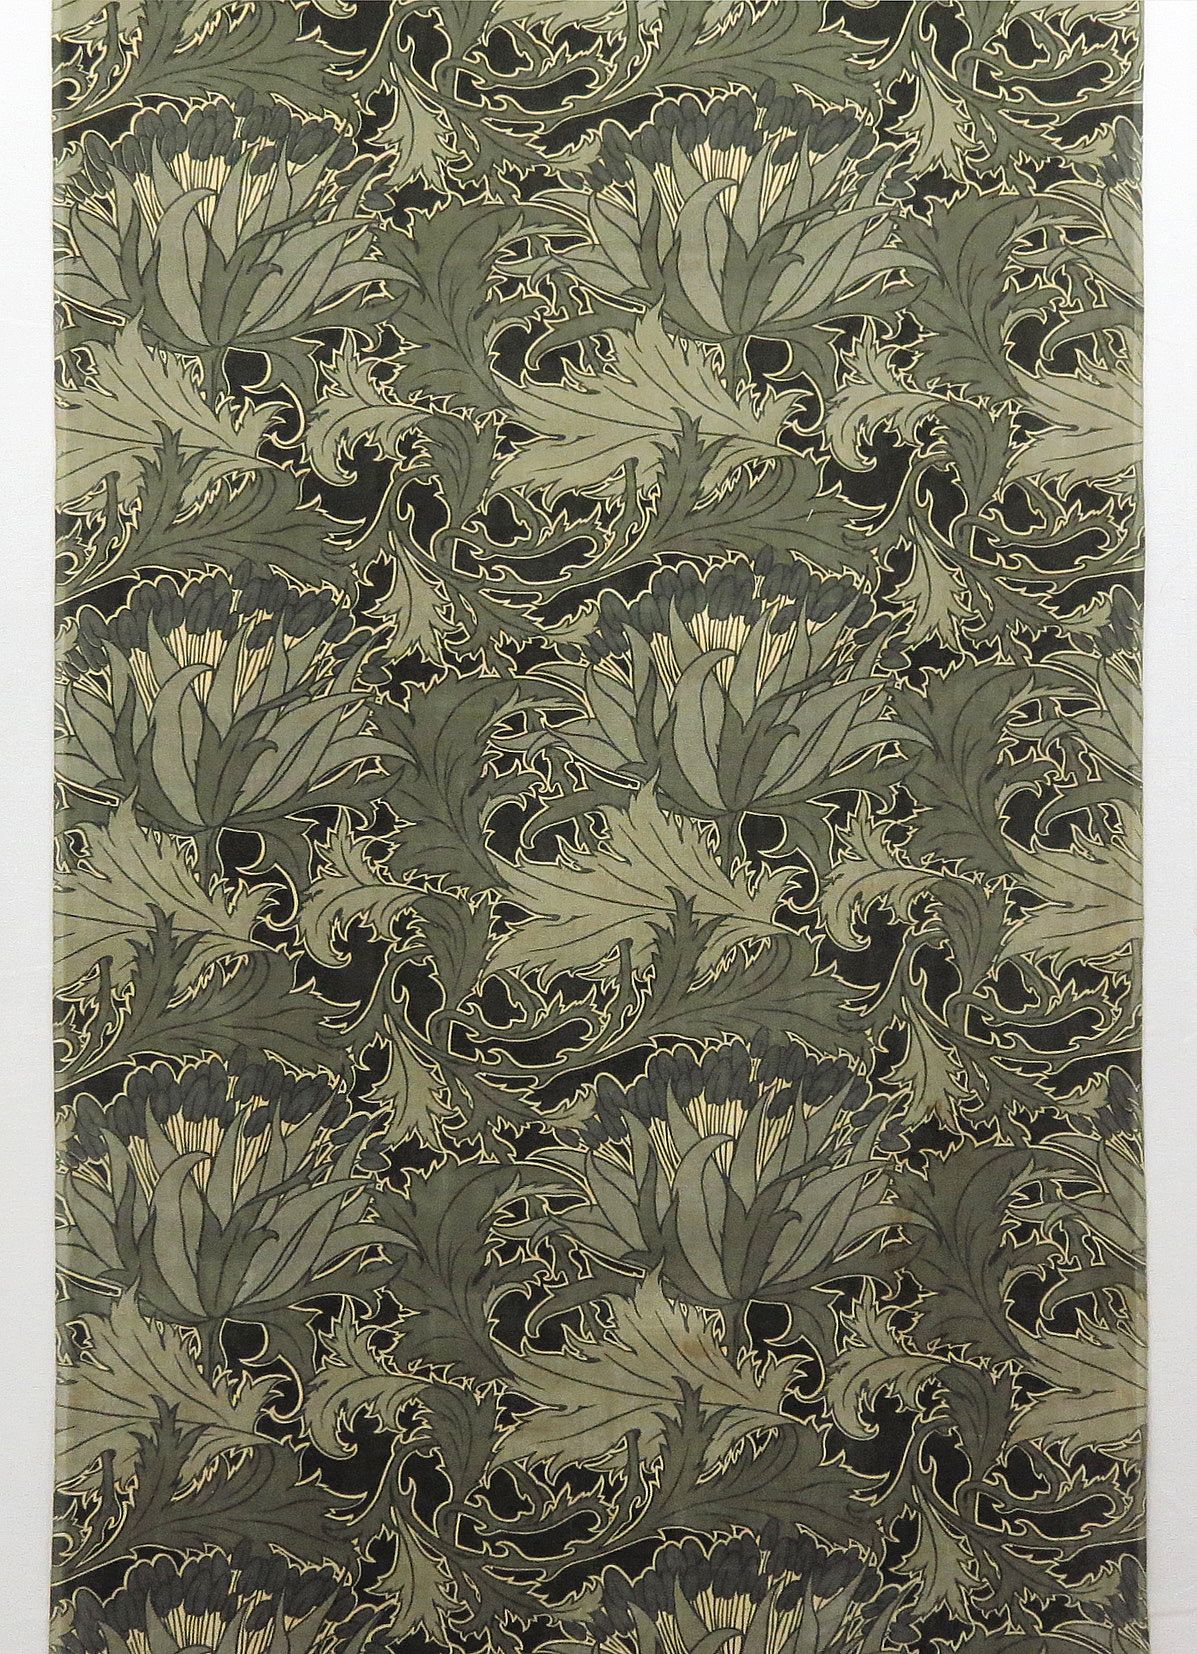 English Textile Design Of The Late 19th Century At Mak Vienna